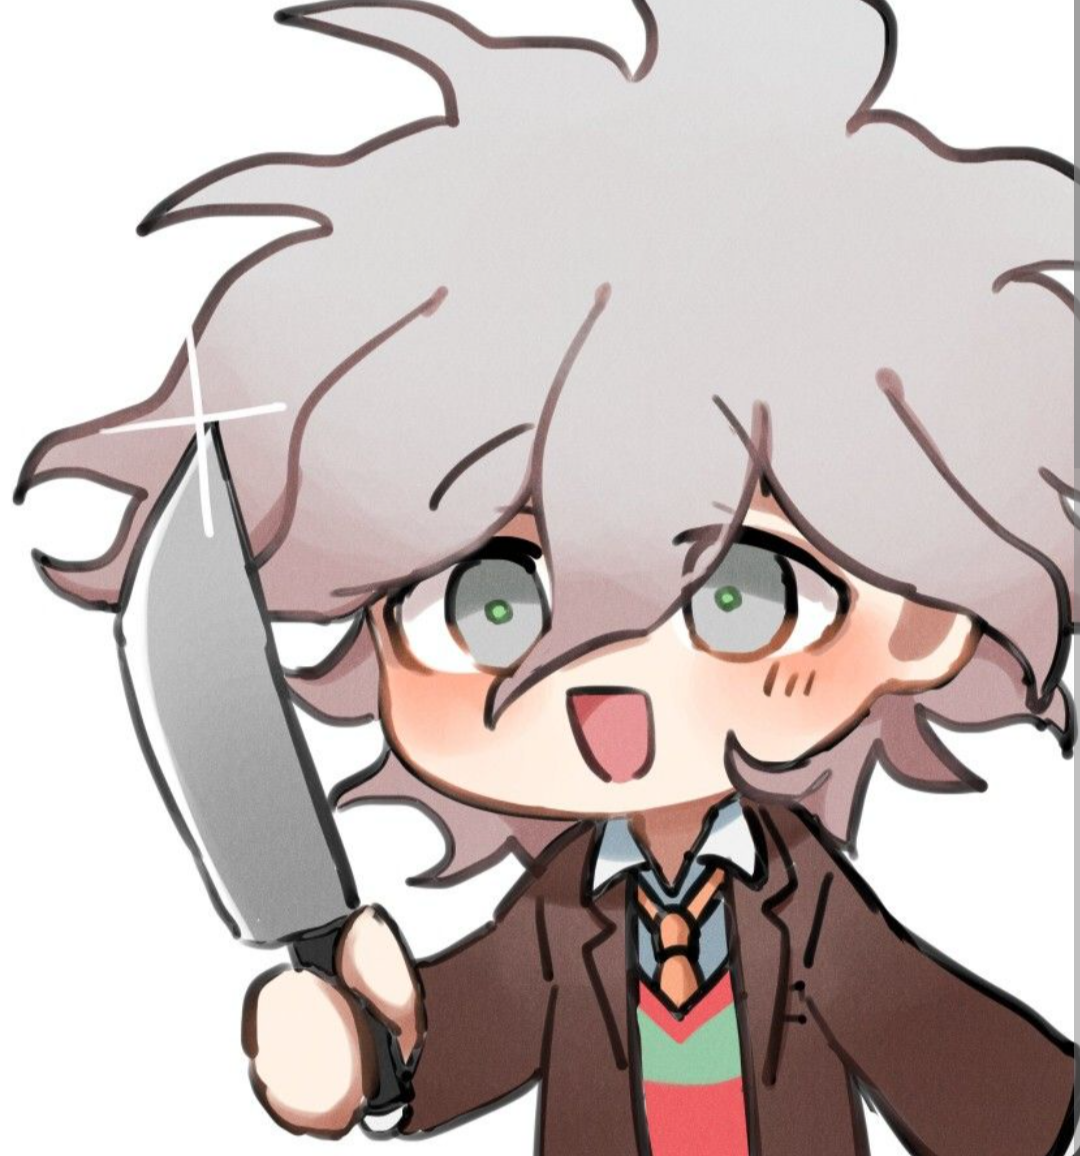 Chibi Nagito with a knife Blank Meme Template